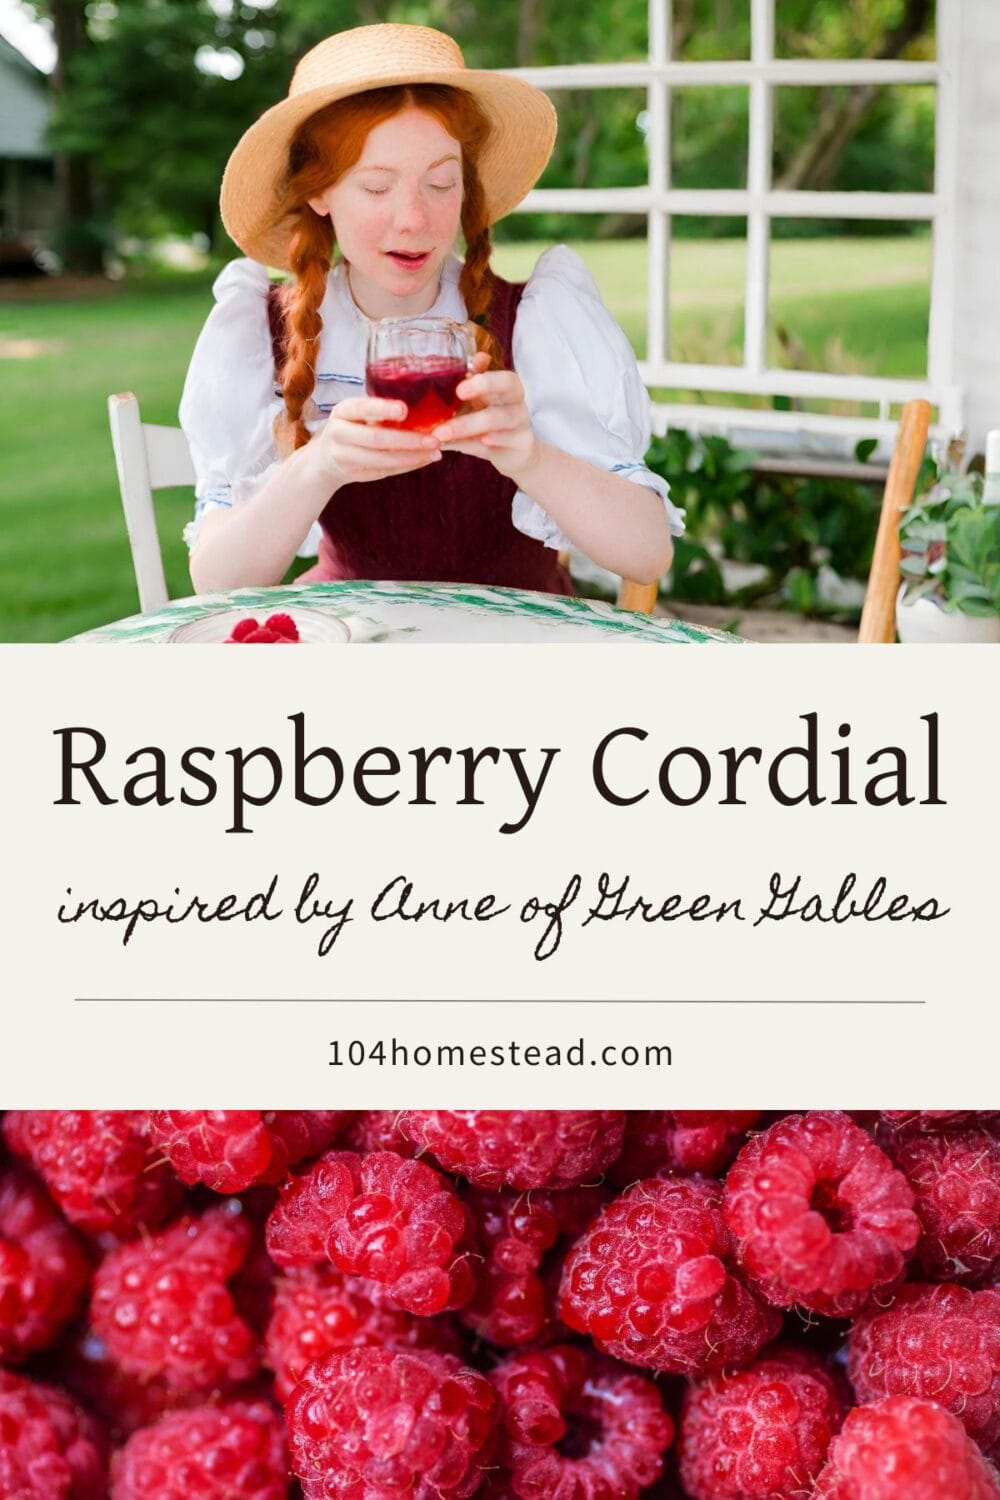 A Pinterest-friendly graphic for my recipe for homemade raspberry cordial inspired by Anne of Green Gables.